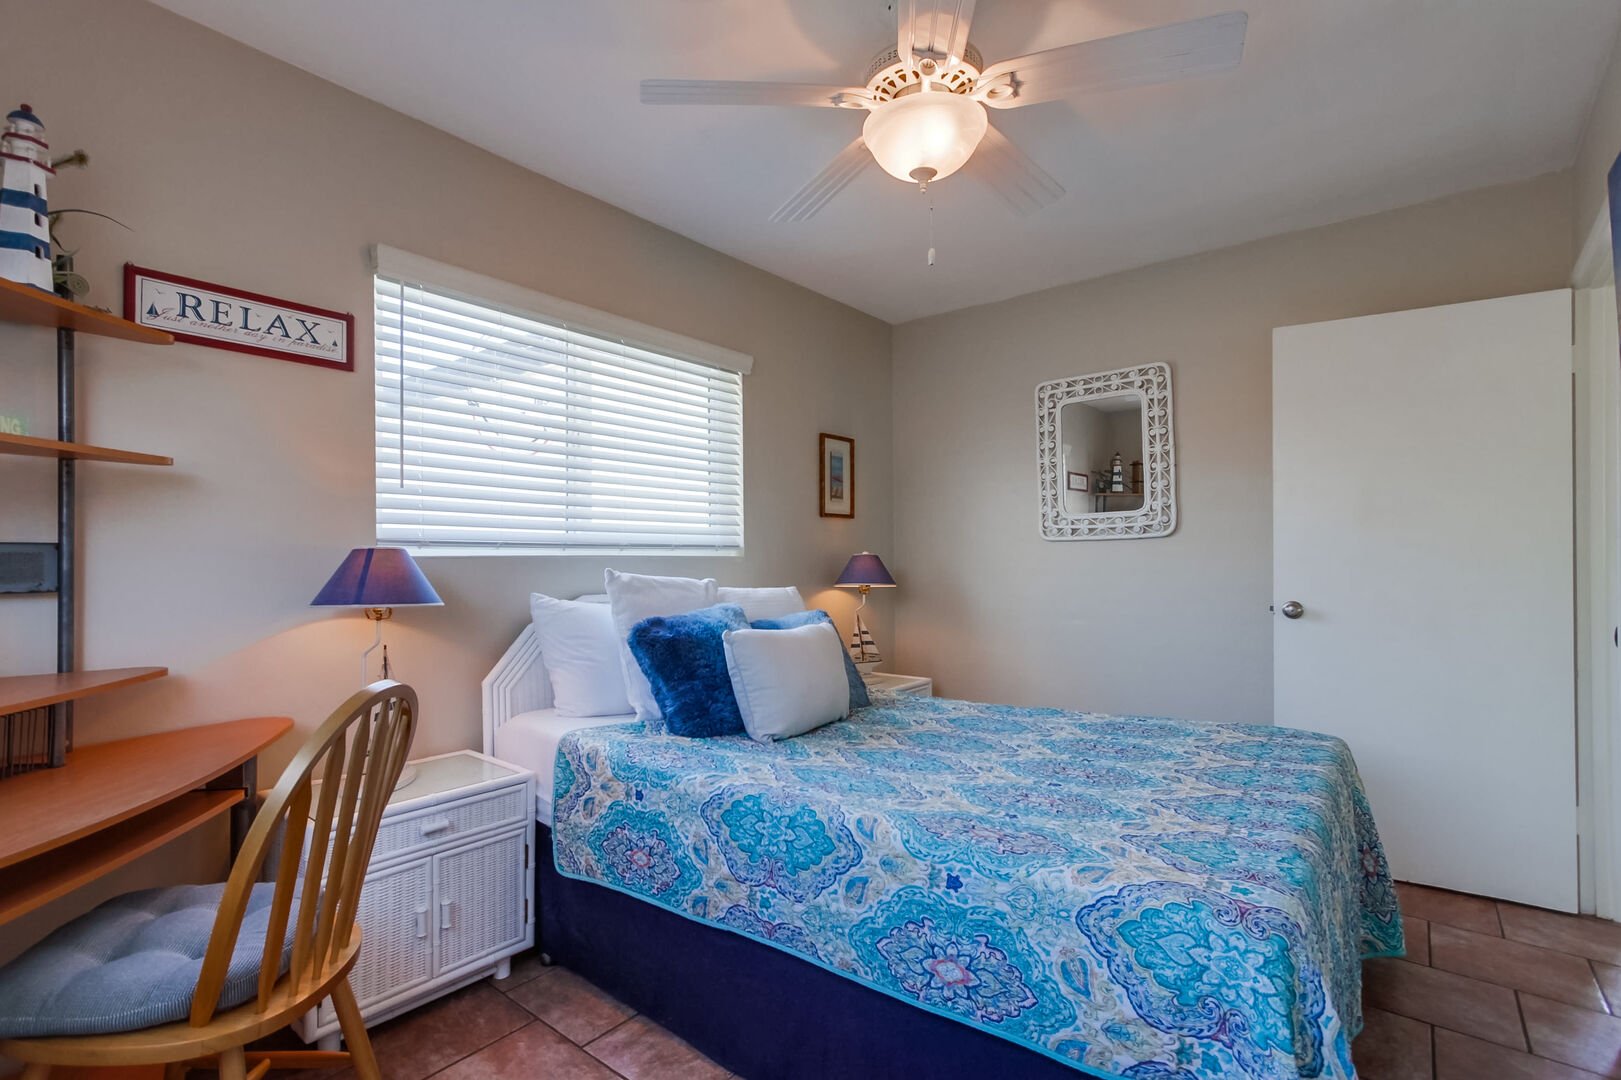 Second guest bedroom with queen size bed, ceiling fan, closet storage and desk to work from the beach!